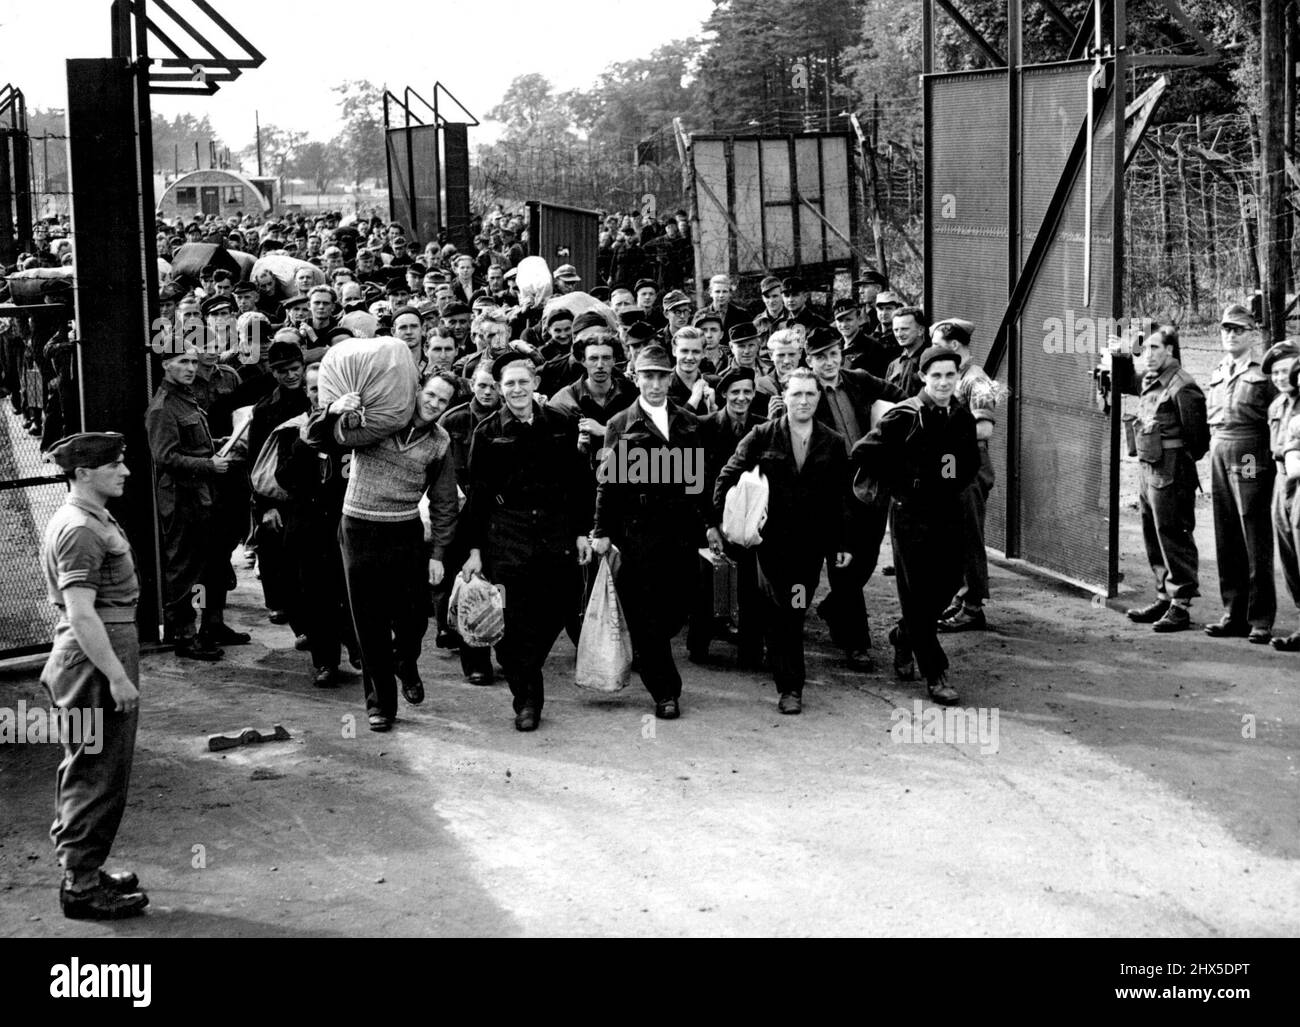 Leaving the Barbed wire behind Them : The first batch of German P.O.Ws to be repatriated under the Government roth scheme will leave almost immediately for home. Here is a batch of them marching out from their camp at Colchester to entrain for the East Coast port from which they will sail to Germany. September 26, 1946. Stock Photo